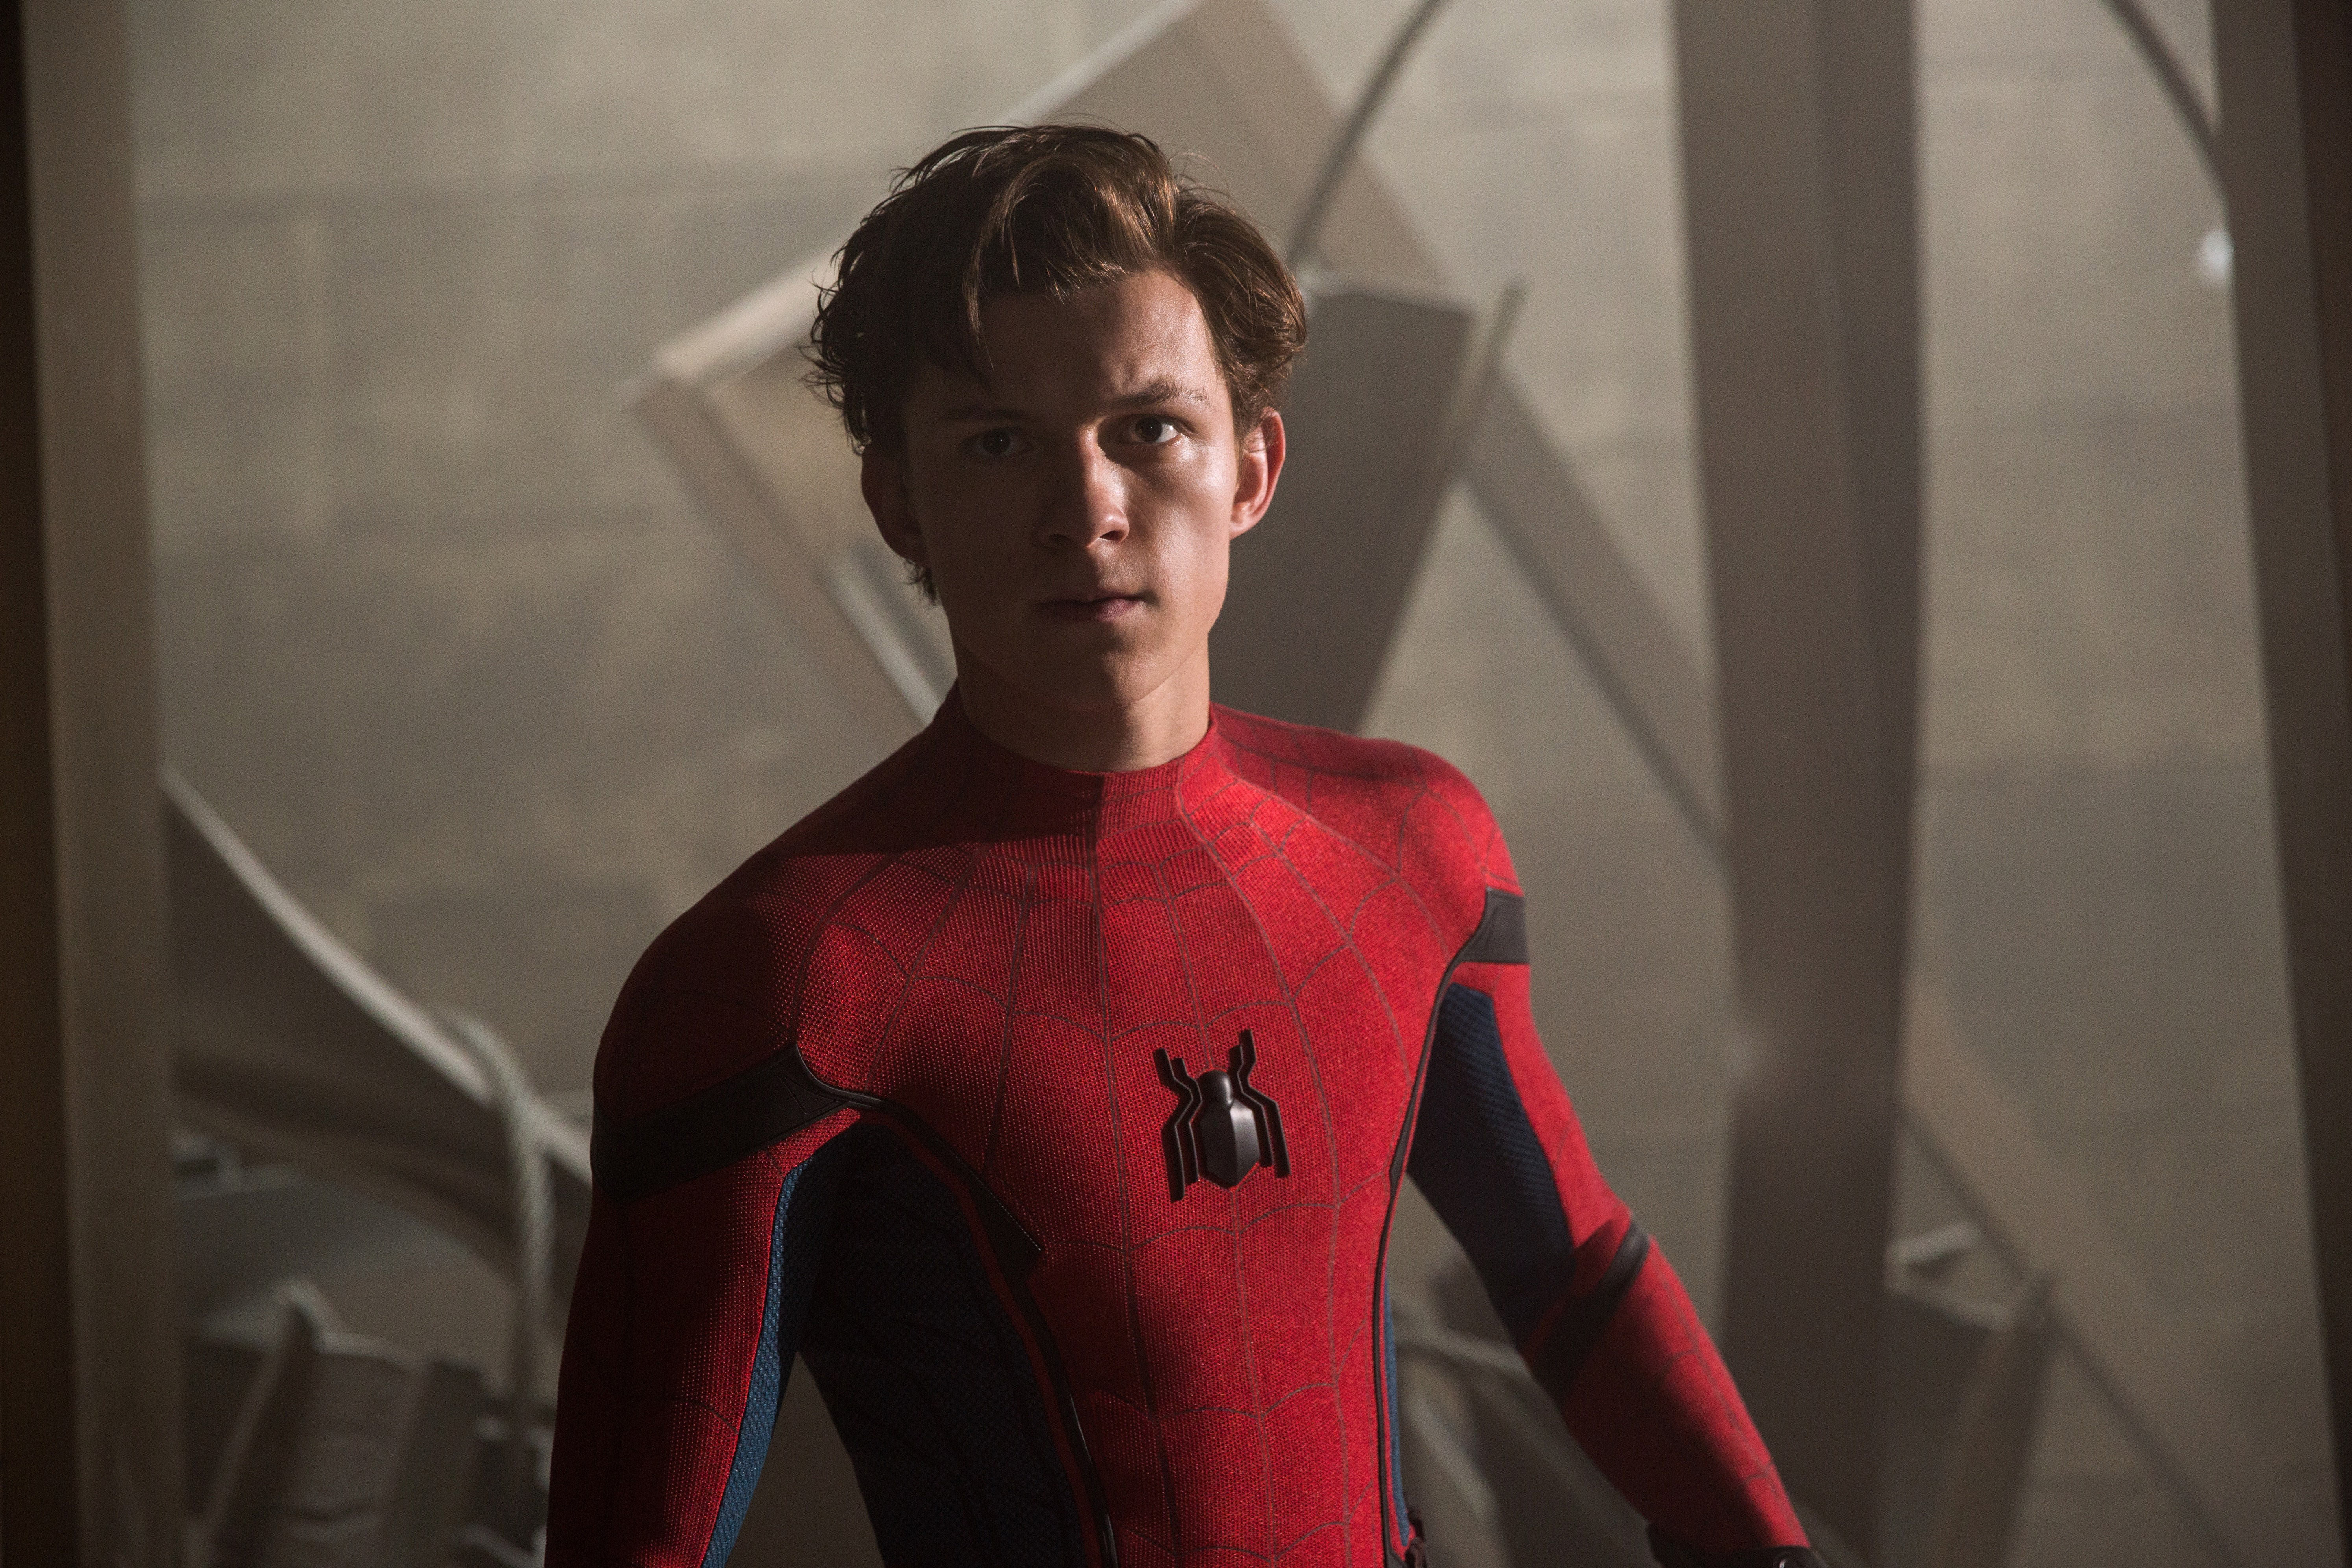 Wallpapers movies Tom Holland spider man on the desktop